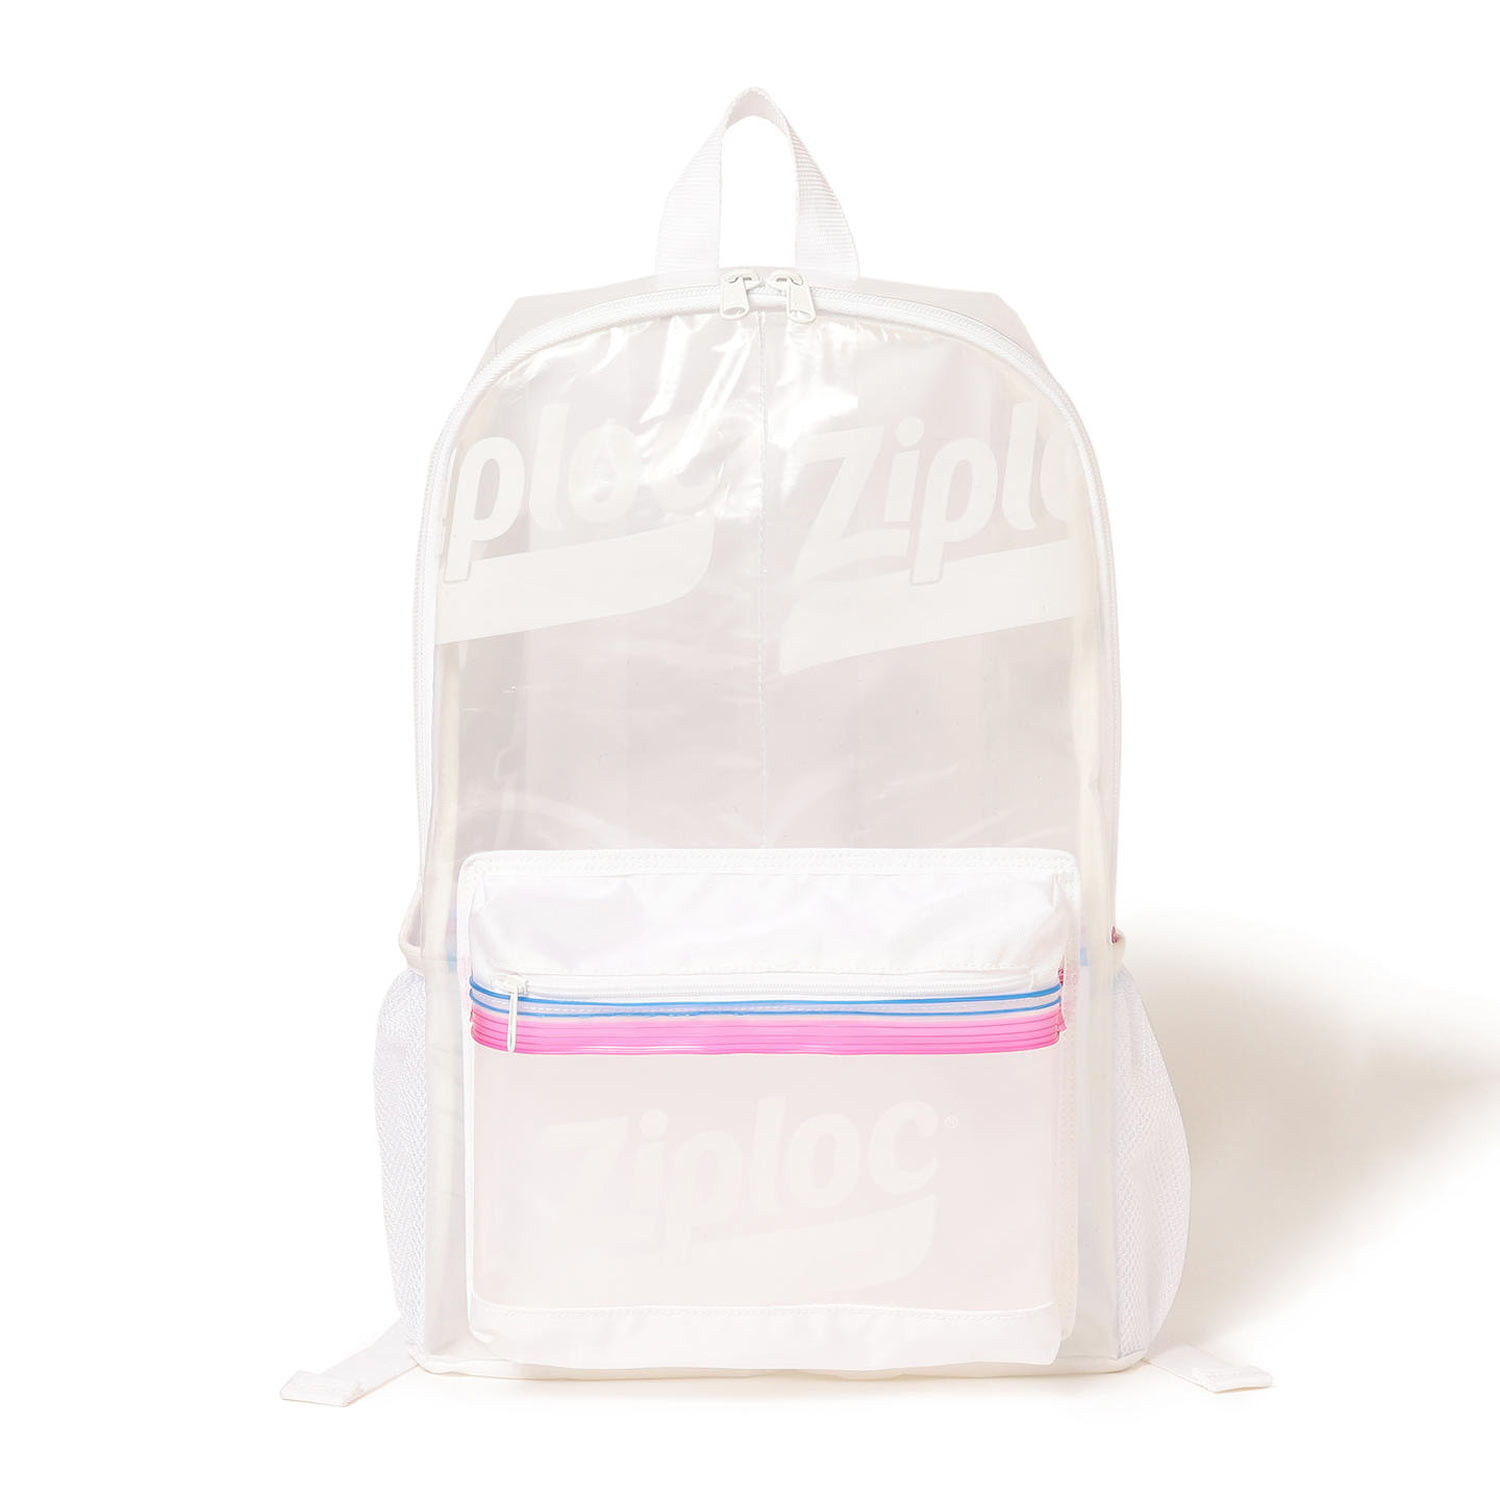 Backpack Organizer Pouches
 Transparent Ziploc Storage Bag Backpack